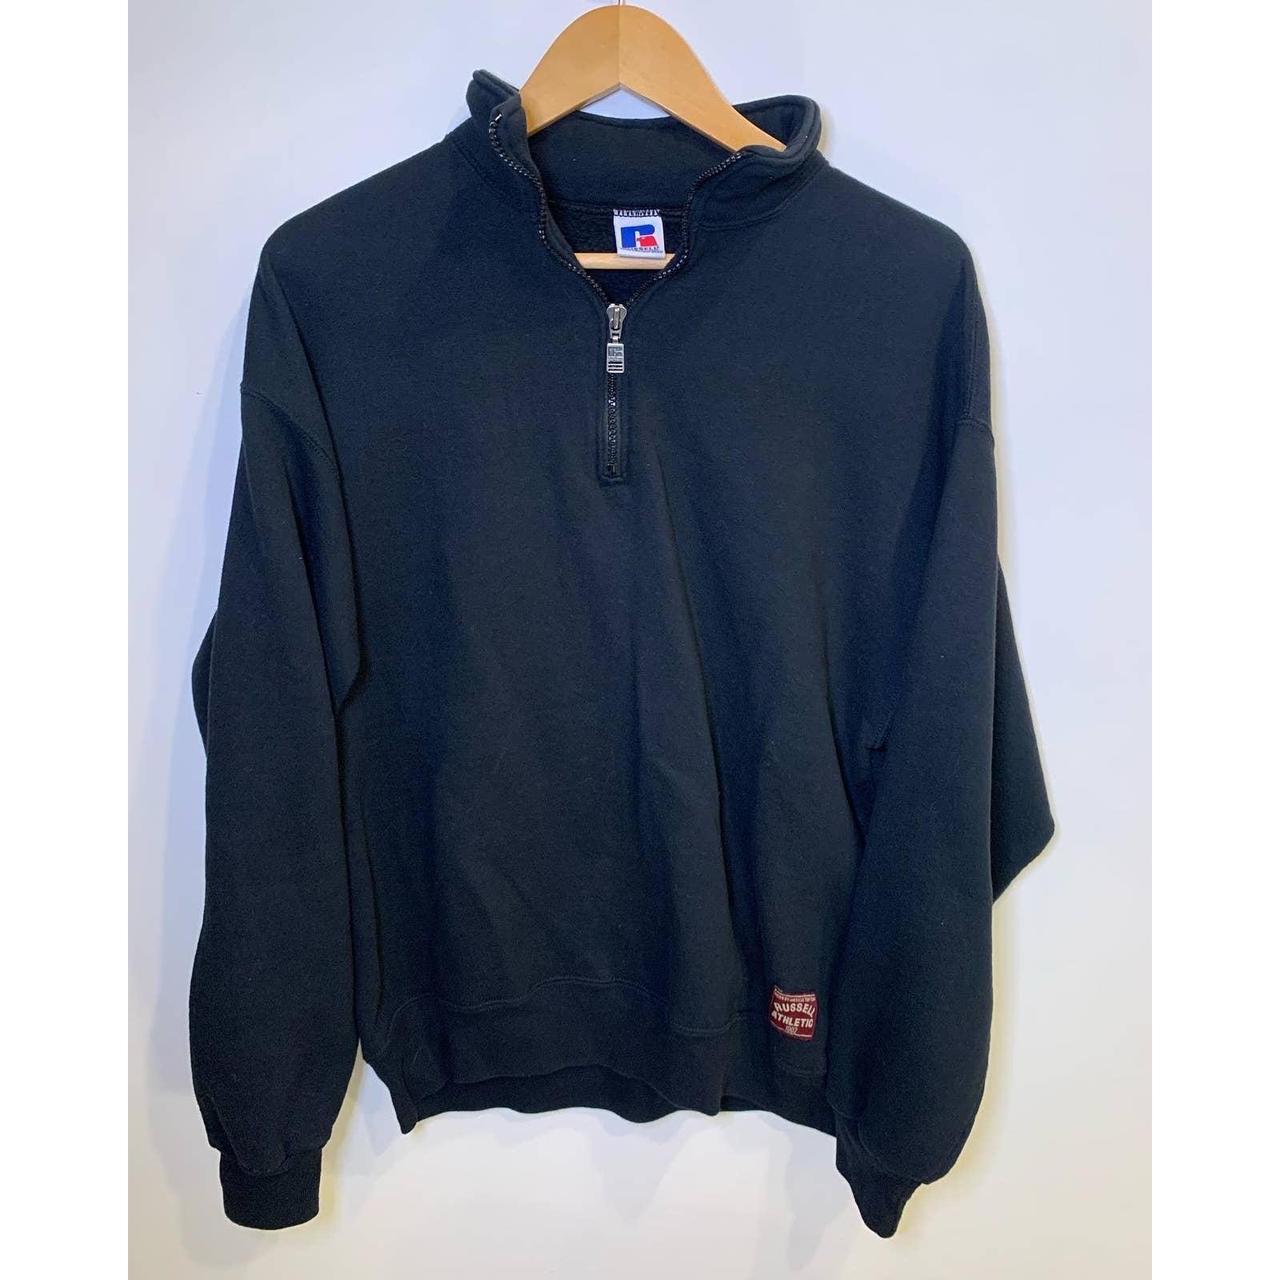 Russell Athletic Men's Black and White Jumper | Depop